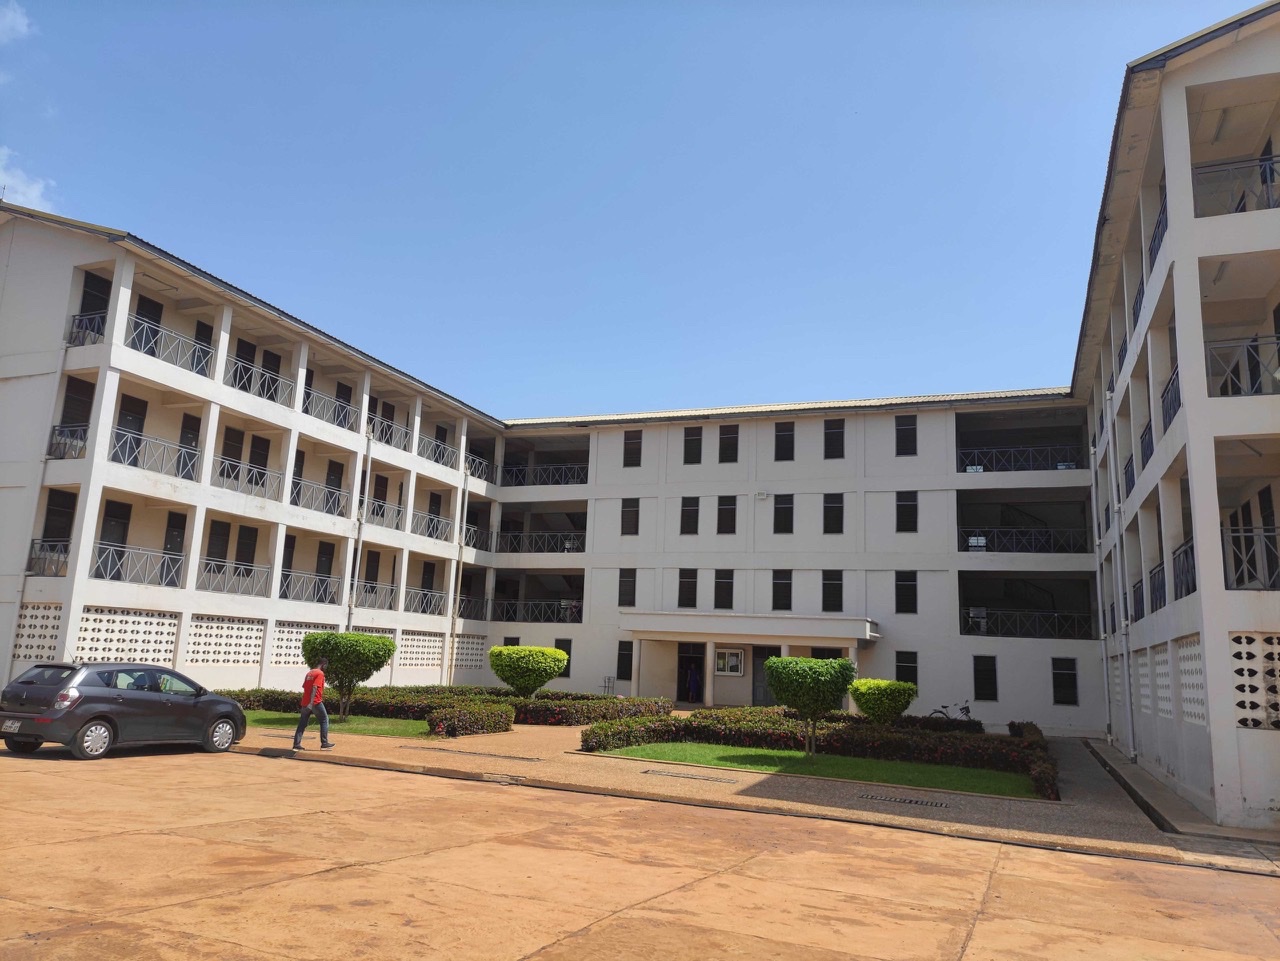 How to Book Hostel At Aamusted Mampong Campus